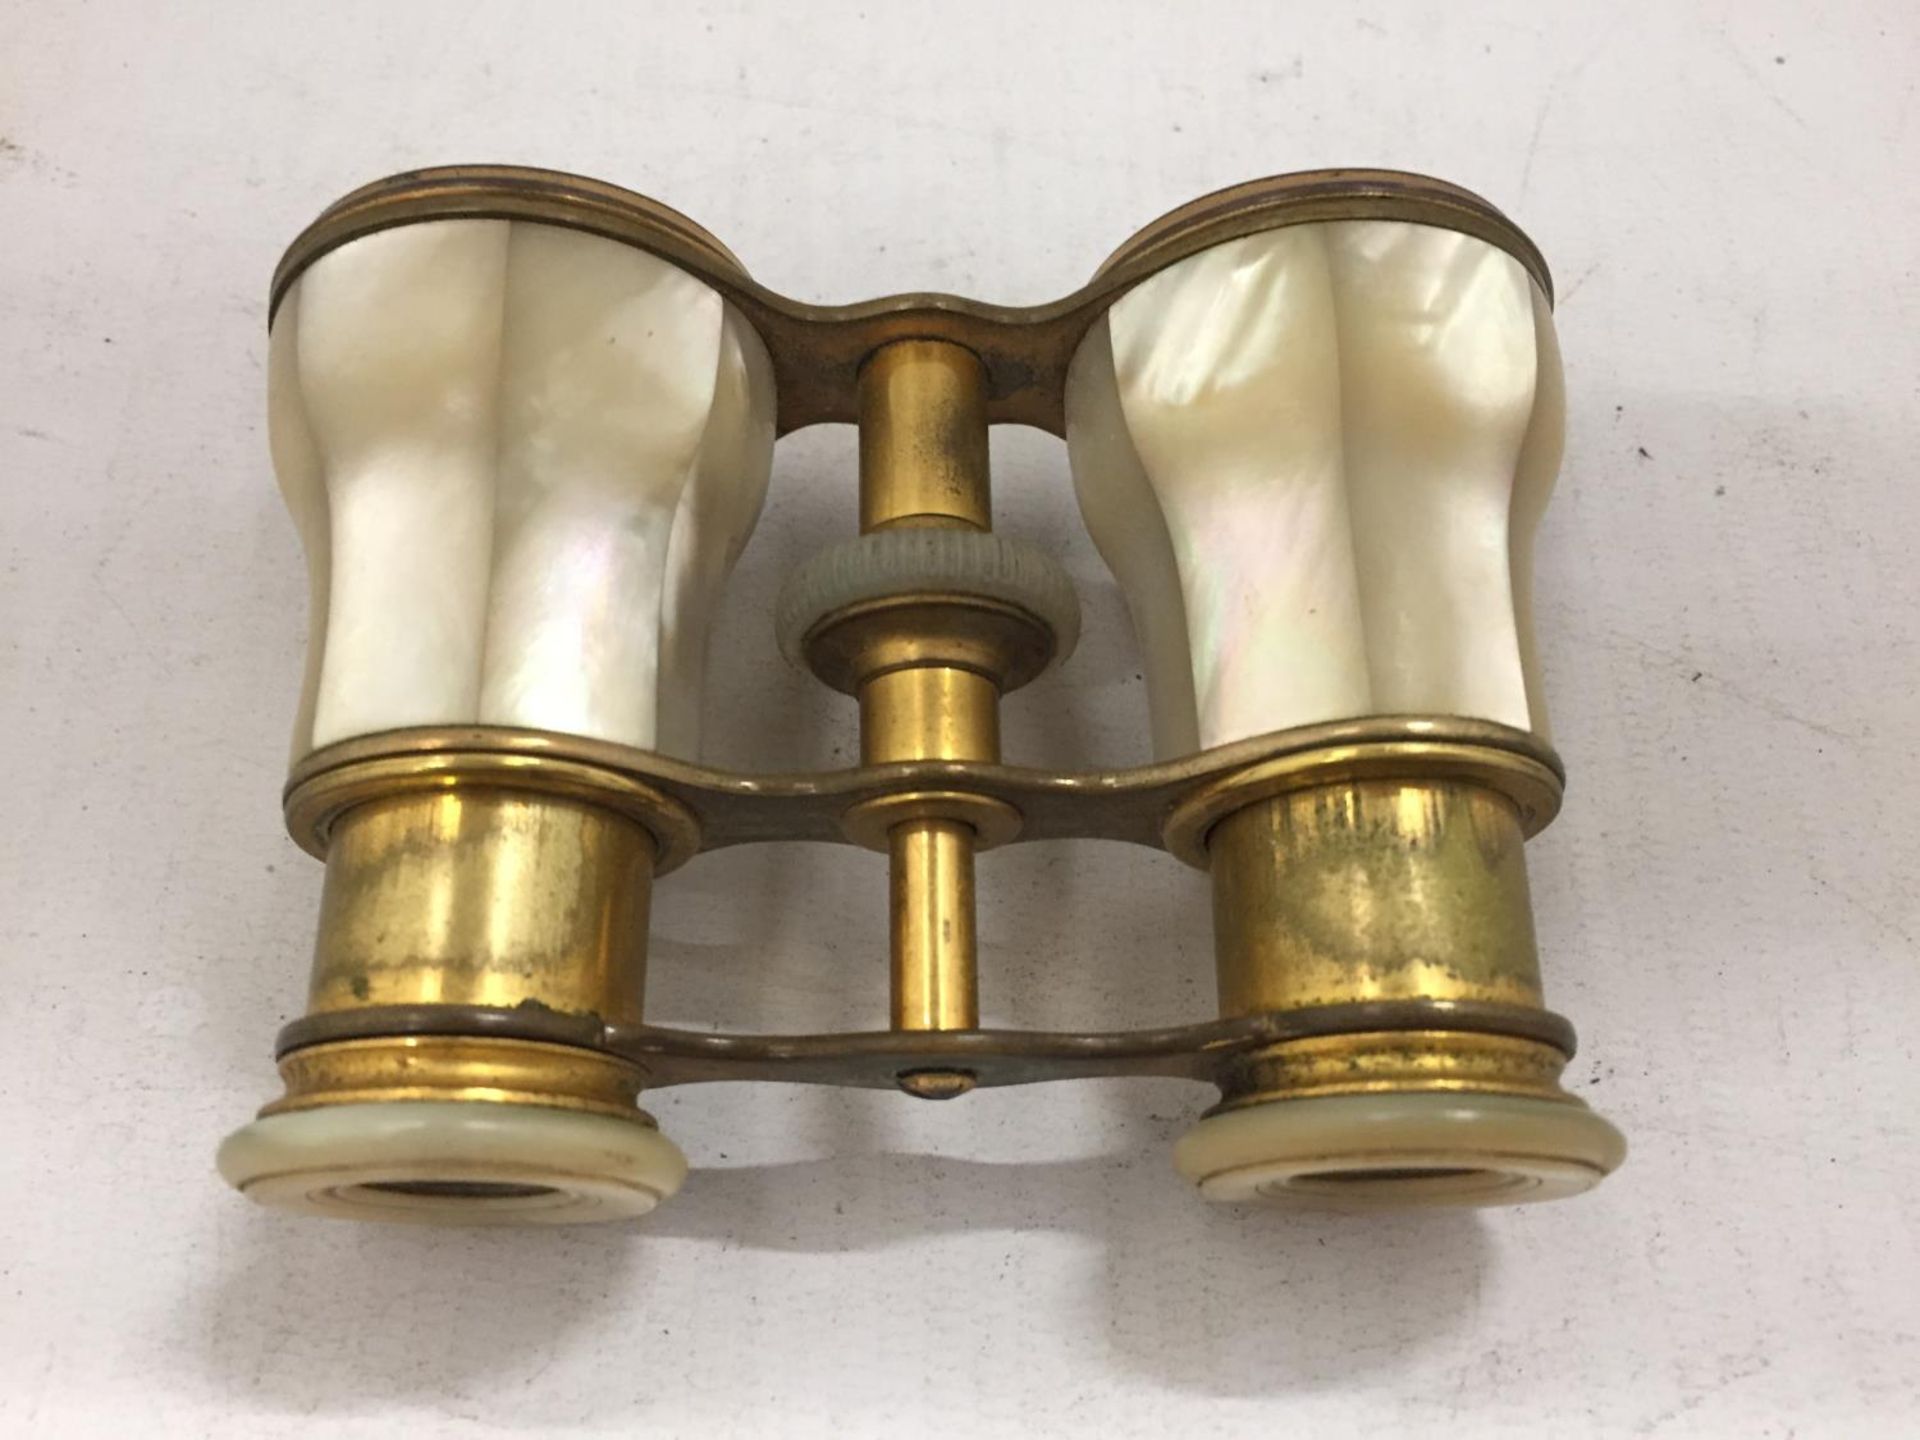 A PAIR OF MOTHER OF PEARL OPERA GLASSES - Image 3 of 3